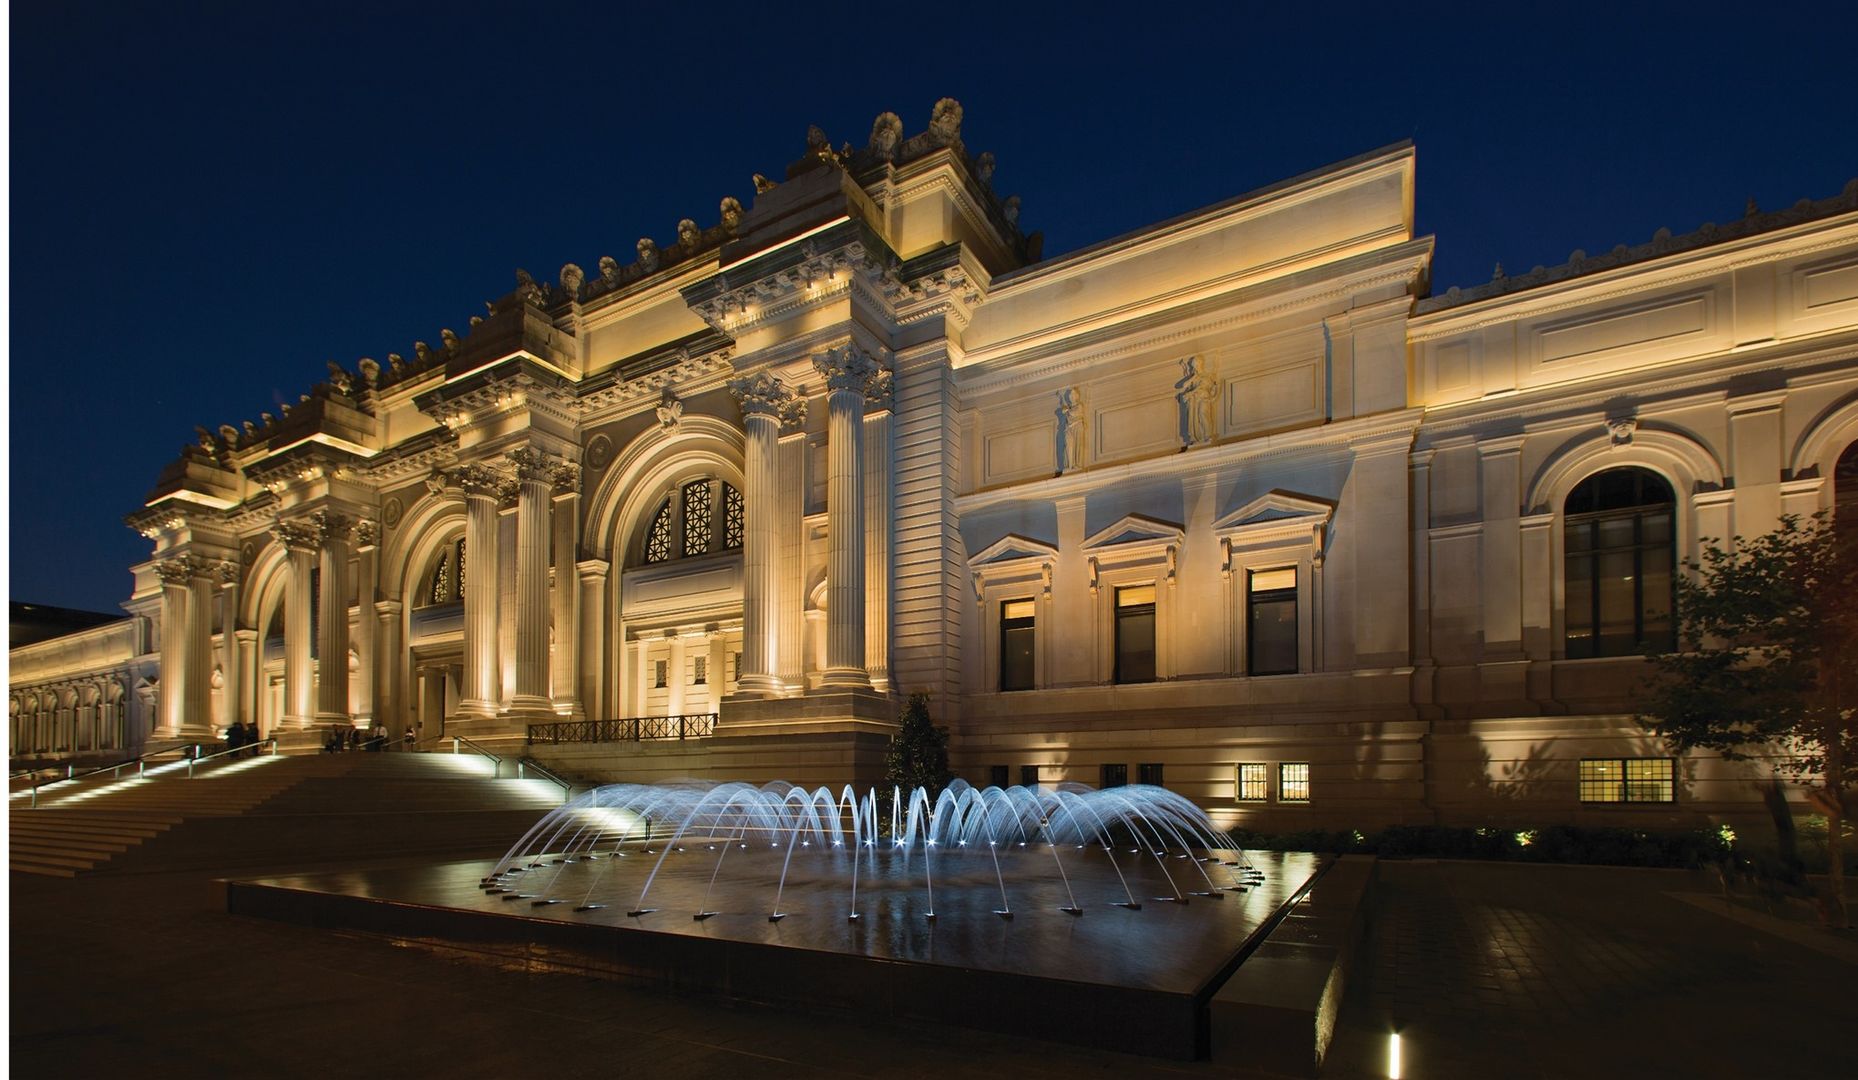 The illuminated façade of The Met Fifth Avenue at night.